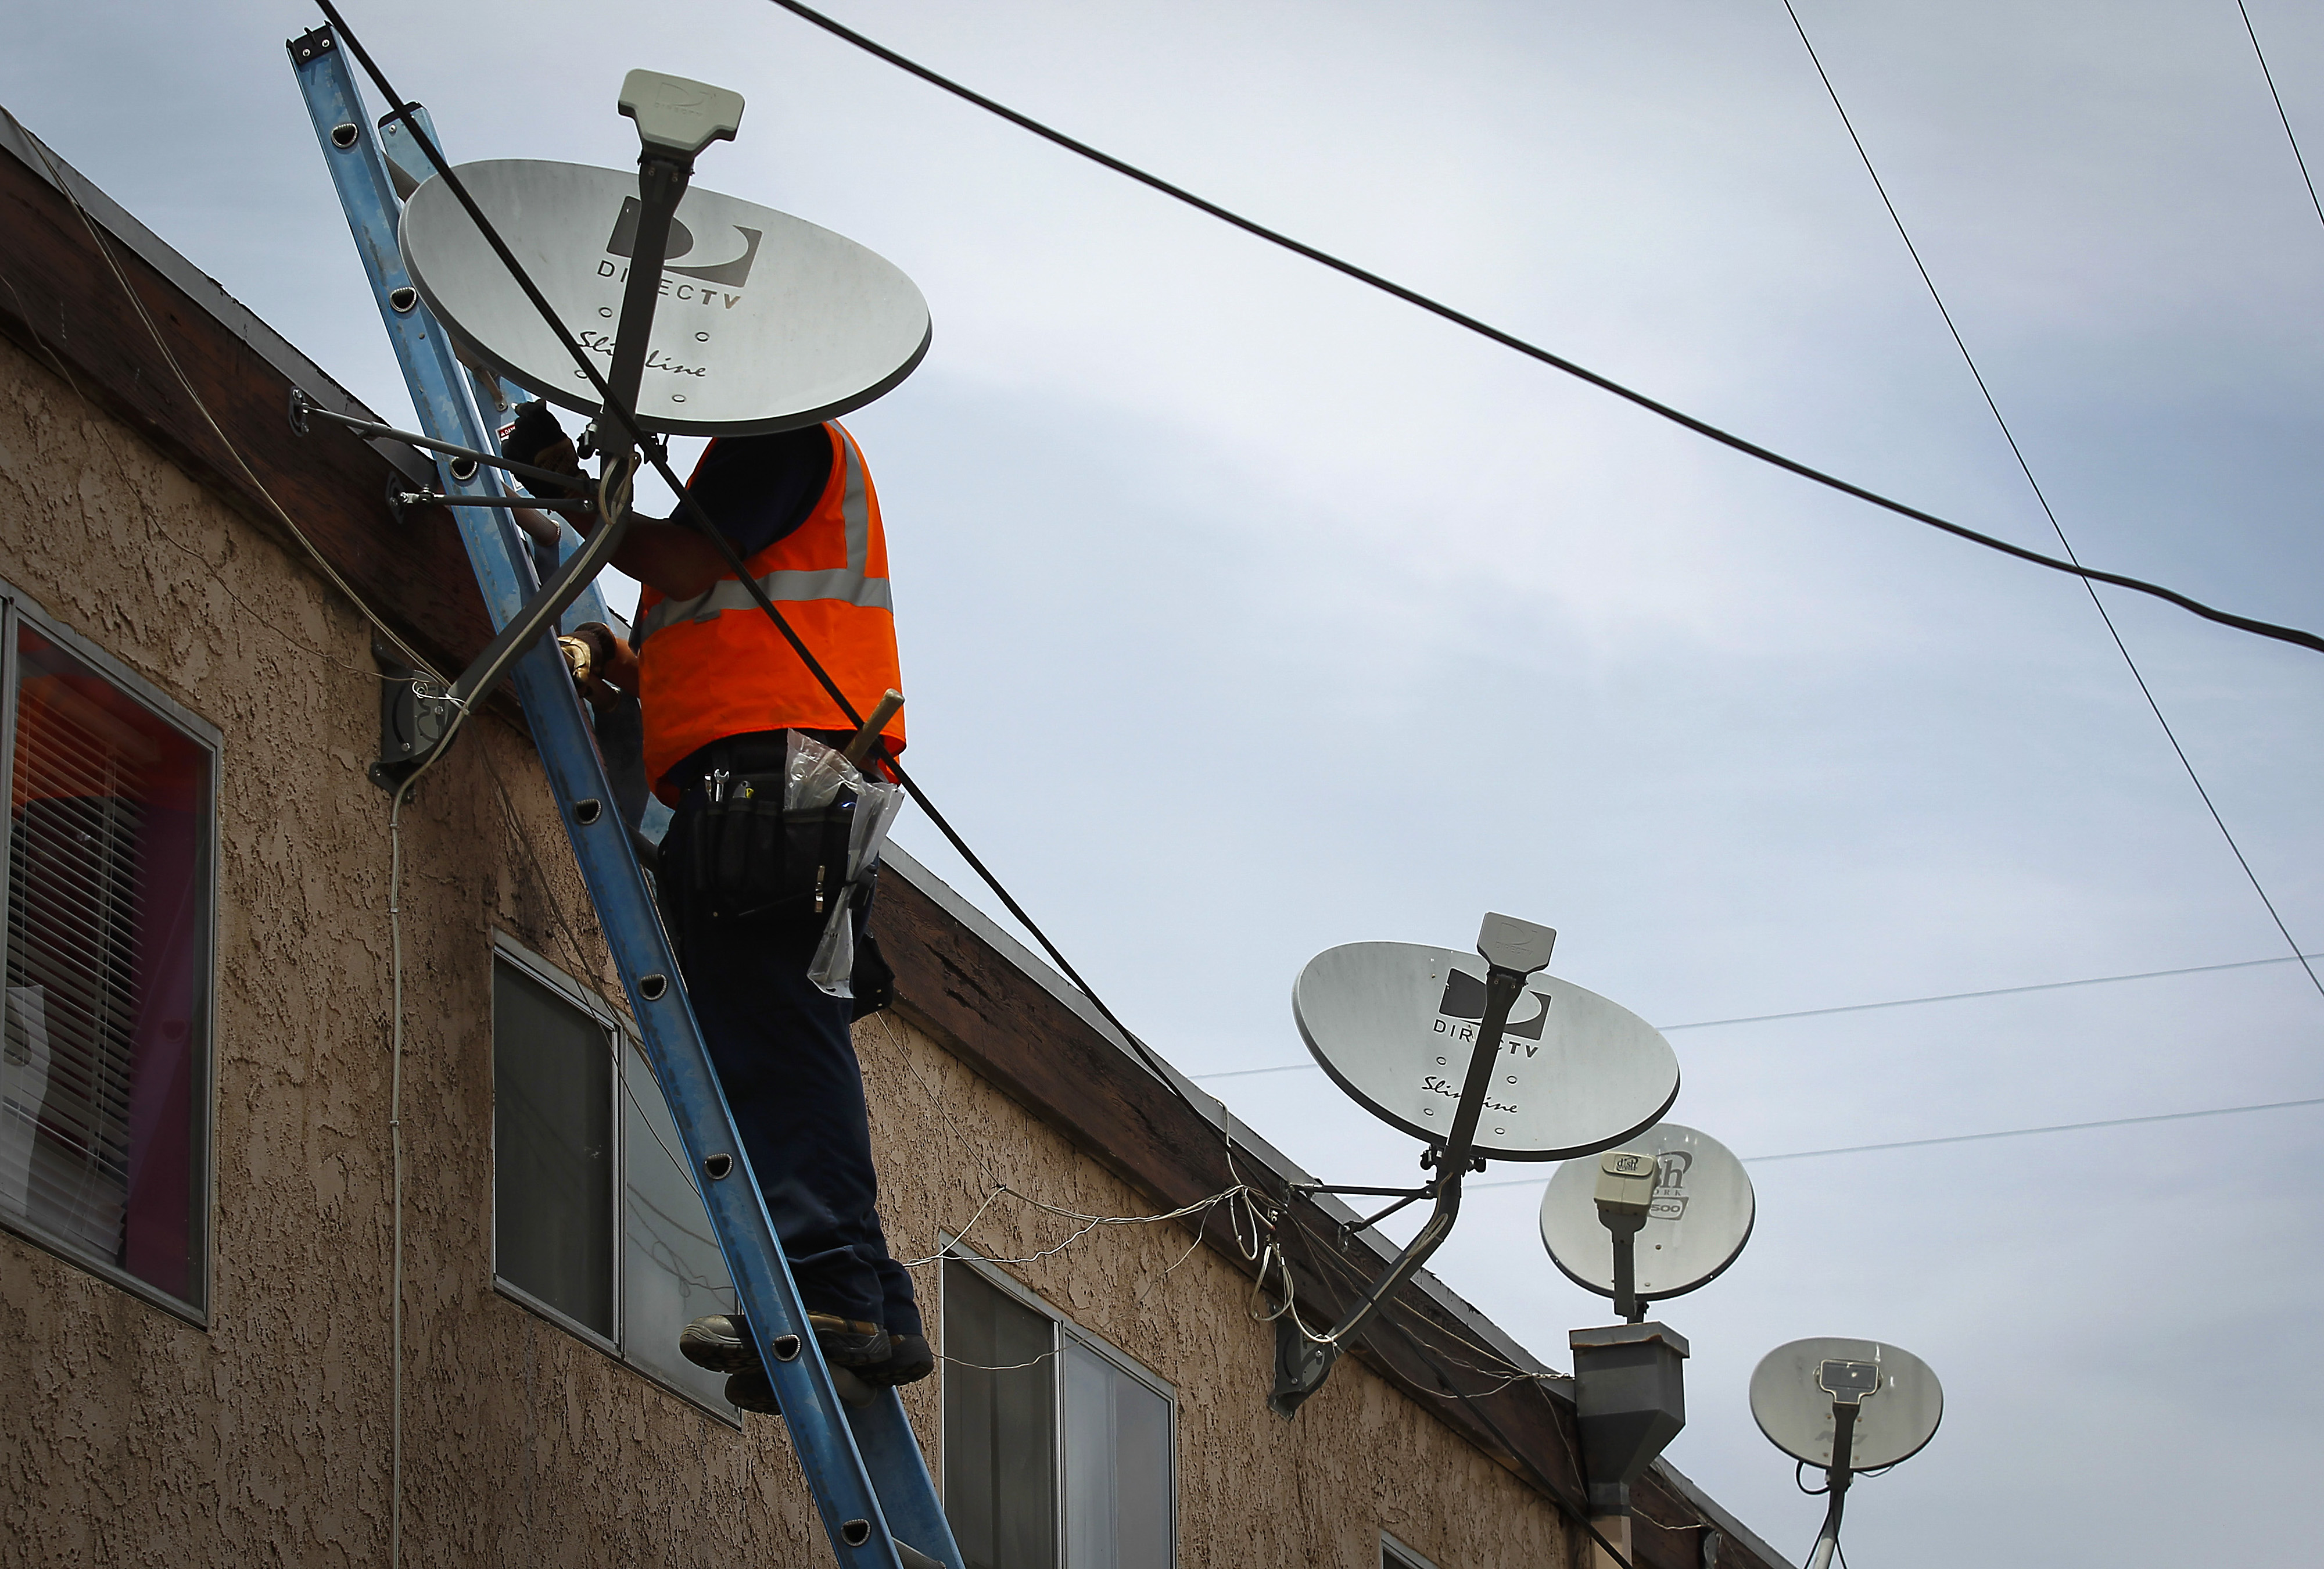 How To Get Your Satellite Company To Pay For Damages It Made Money